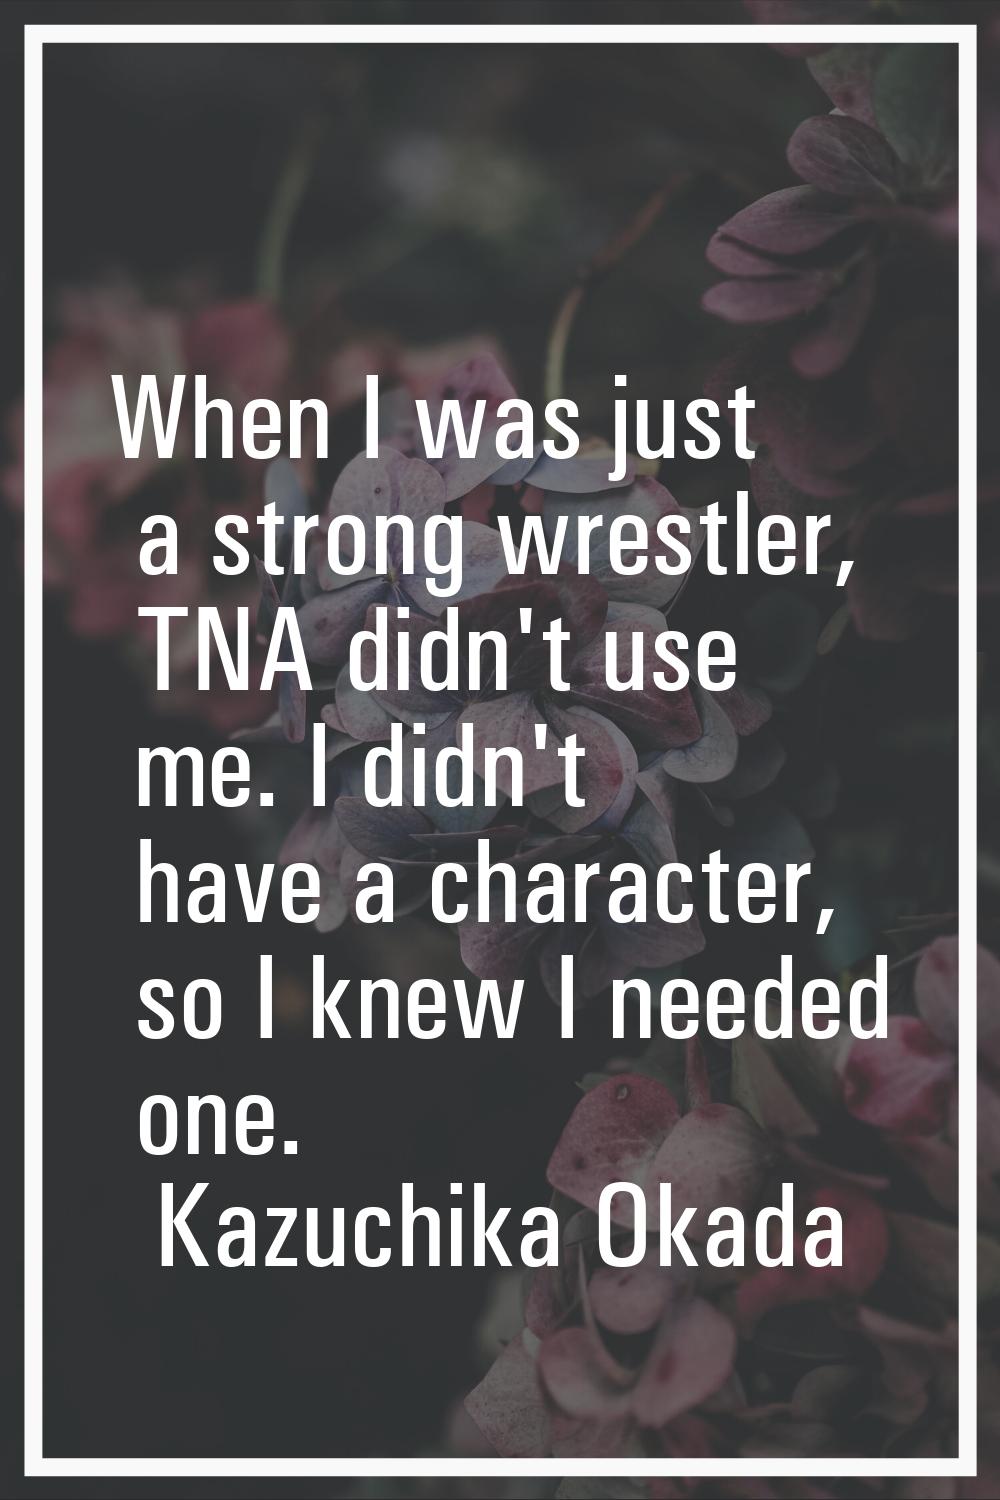 When I was just a strong wrestler, TNA didn't use me. I didn't have a character, so I knew I needed